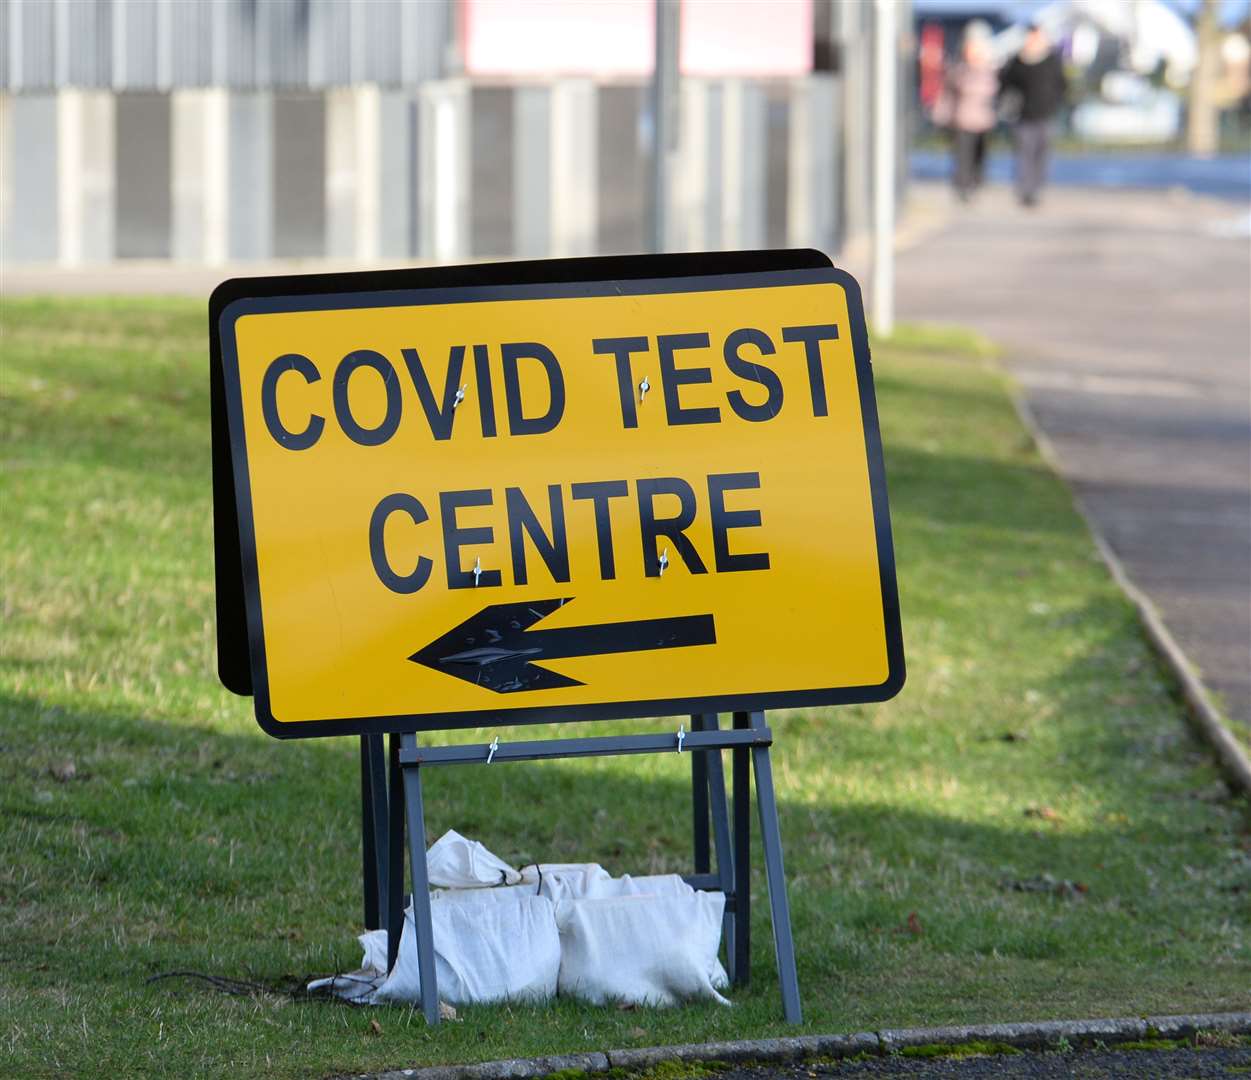 Three Sutherland fire stations are serving as Covid-19 test centres.